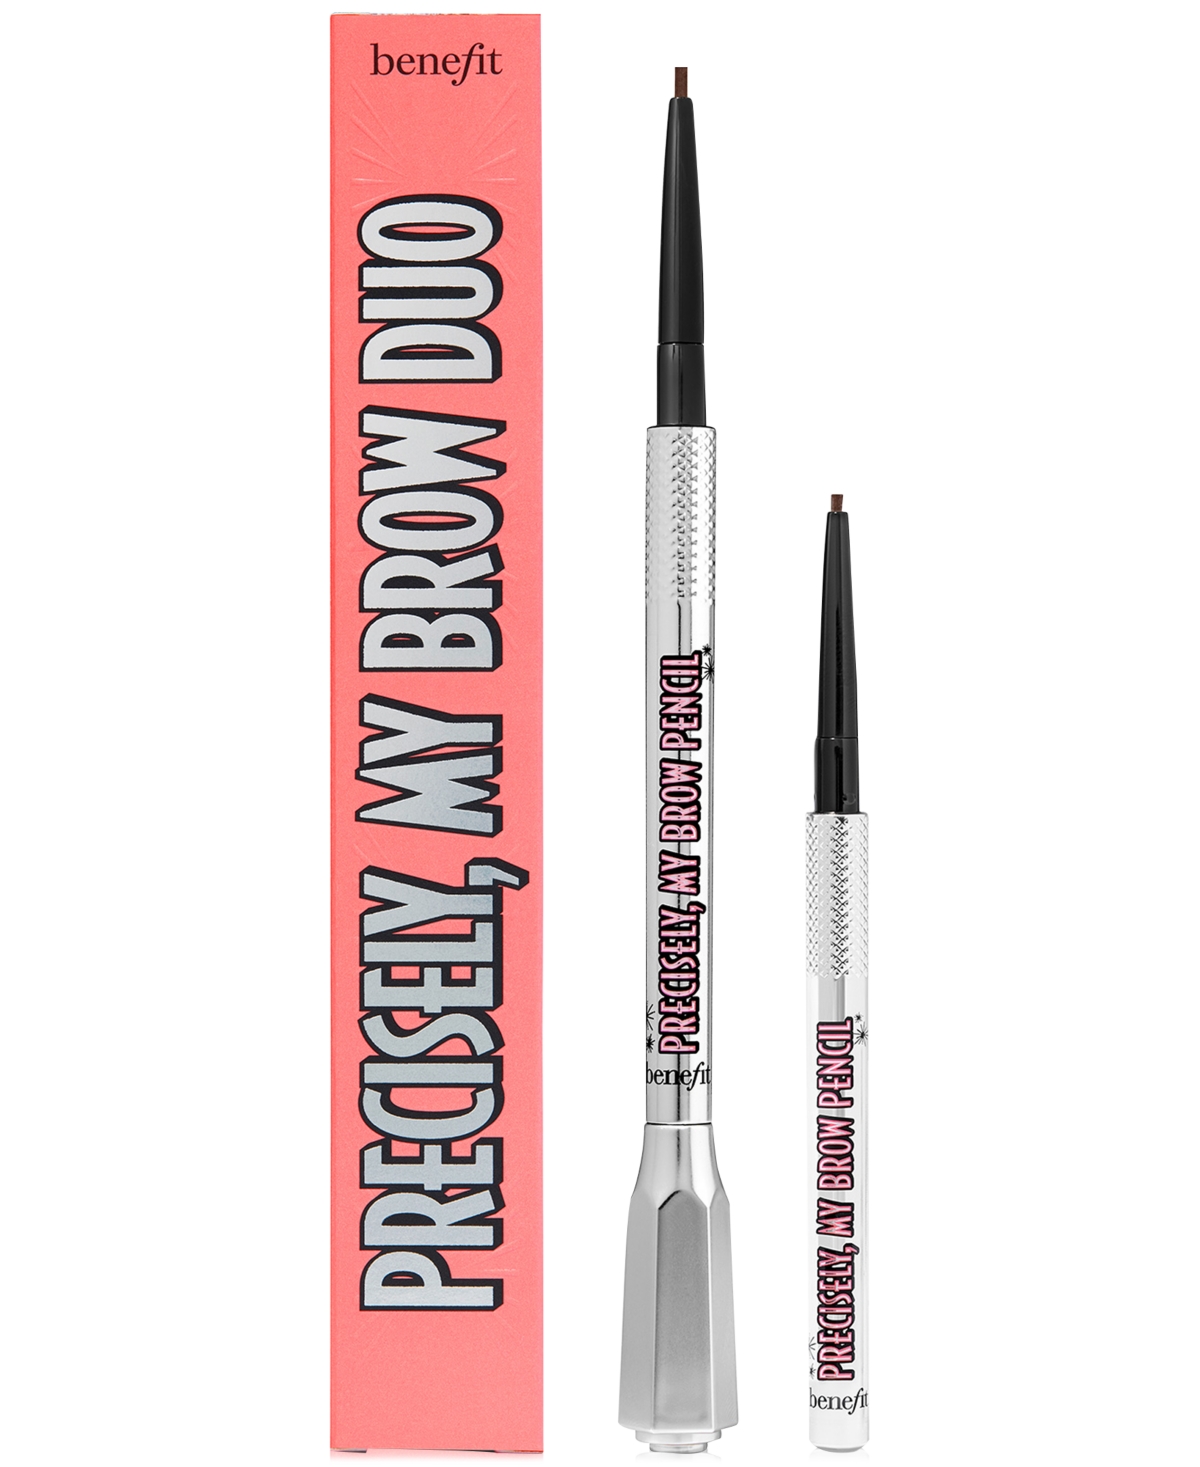 Benefit Cosmetics 2-pc. Precisely, My Brow Defining Eyebrow Pencil Set In Warm Deep Brown